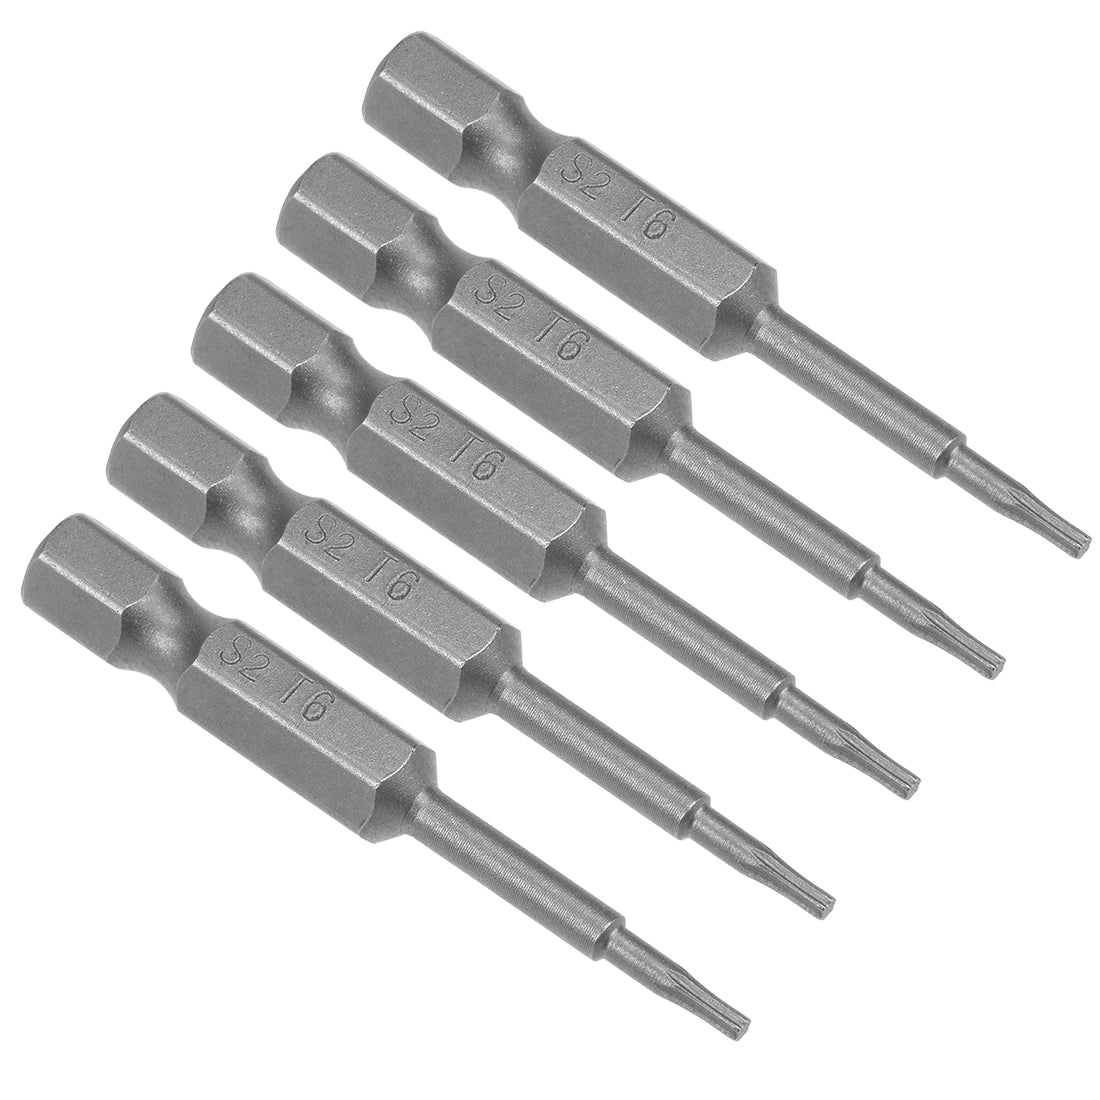 Uxcell Uxcell 5pcs 50mm Long 1/4" Hex Shank T6 Magnetic Torx Head Screwdriver Bits S2 High Alloy Steel